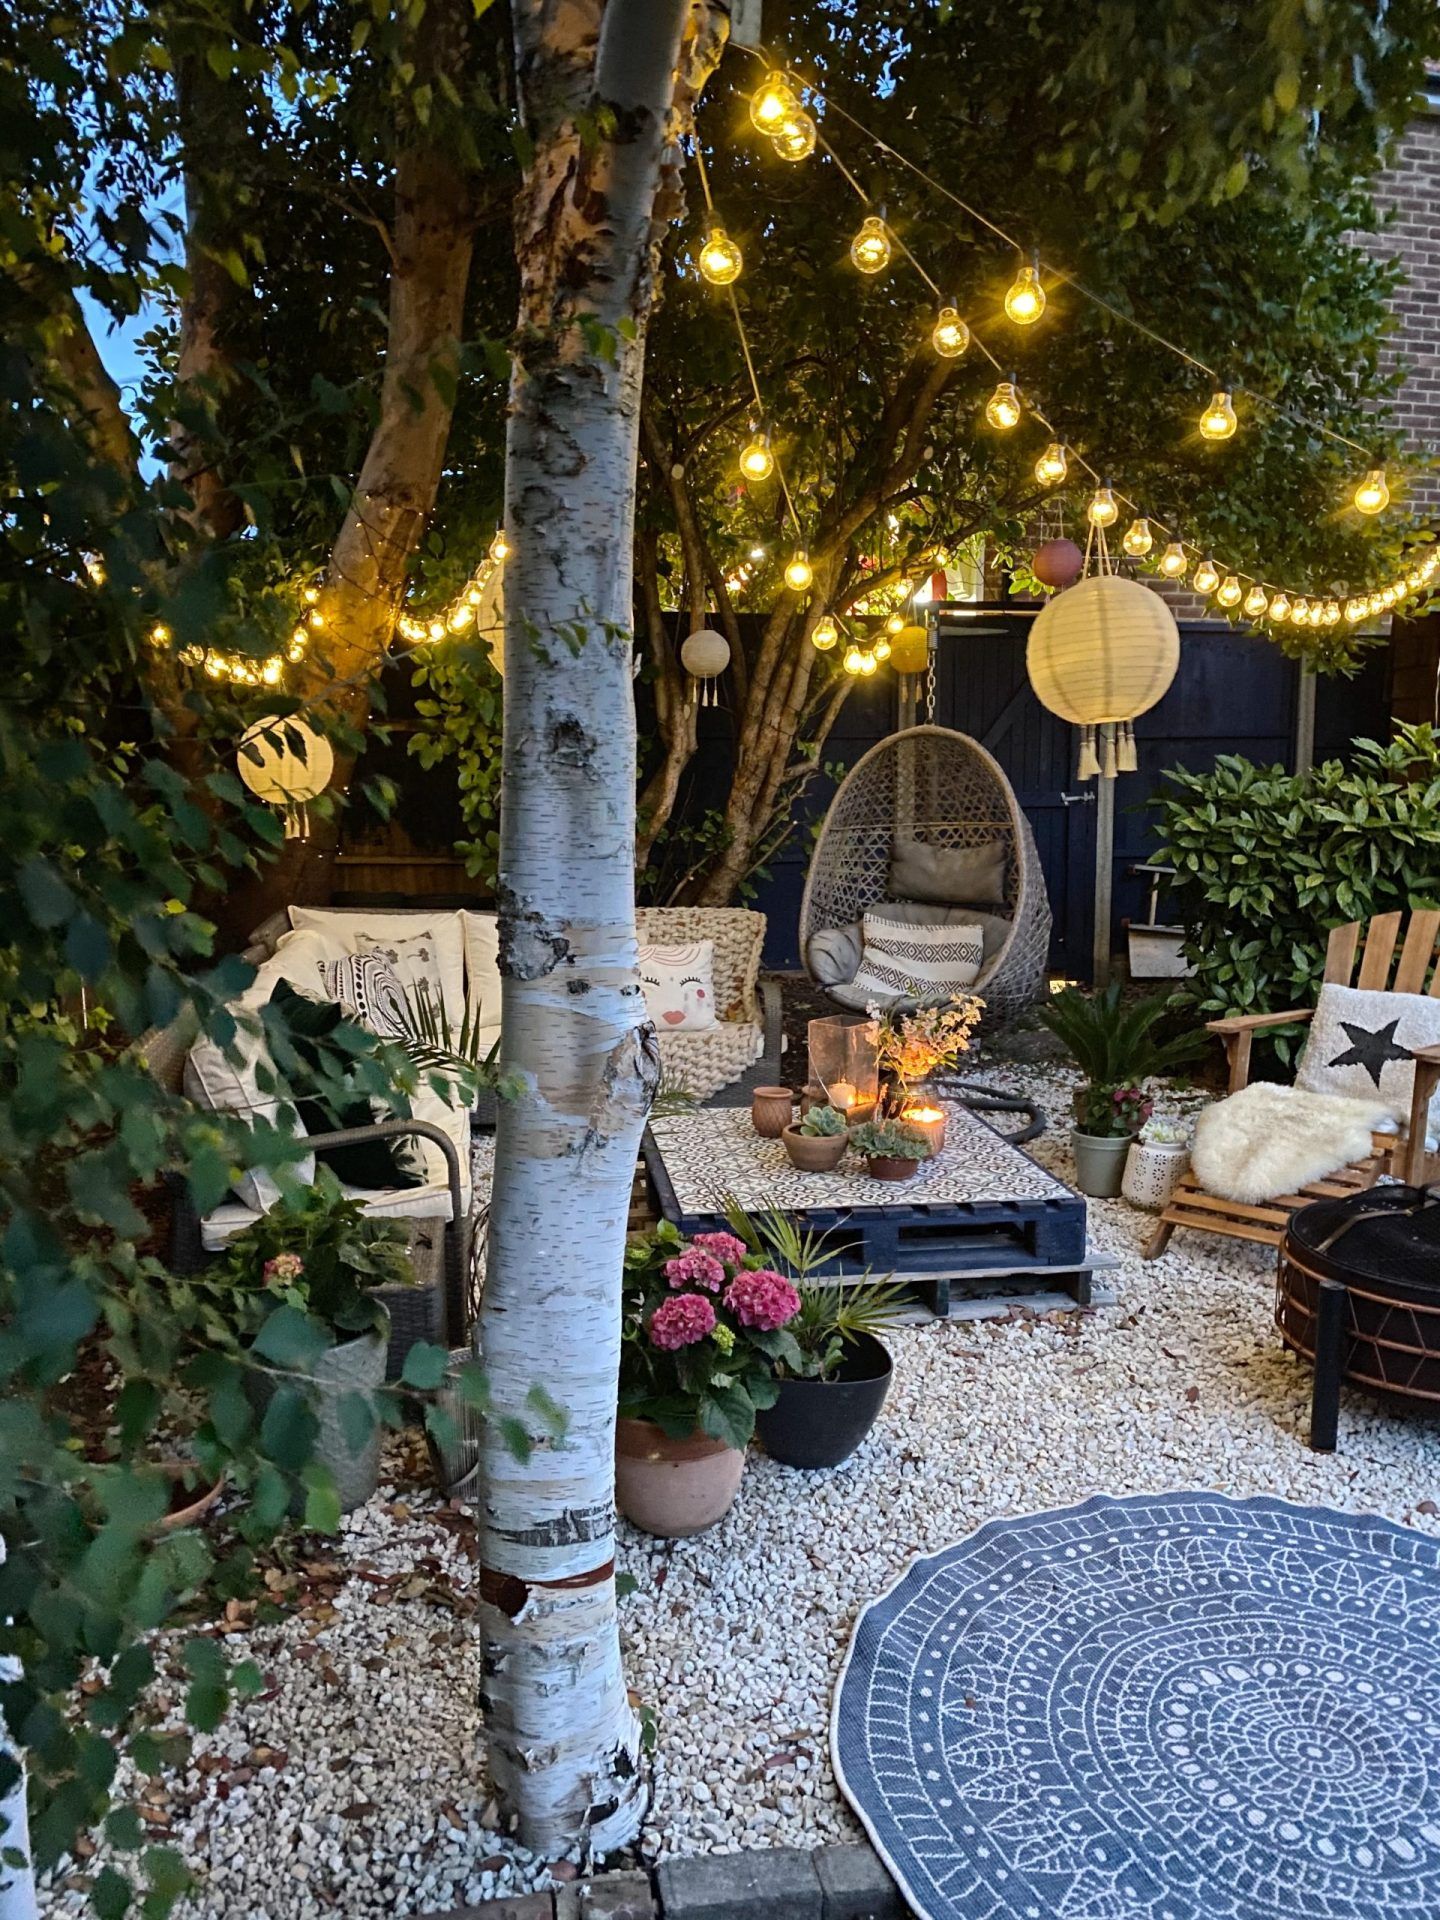 Innovative Garden Seating Solutions for
Any Size Yard